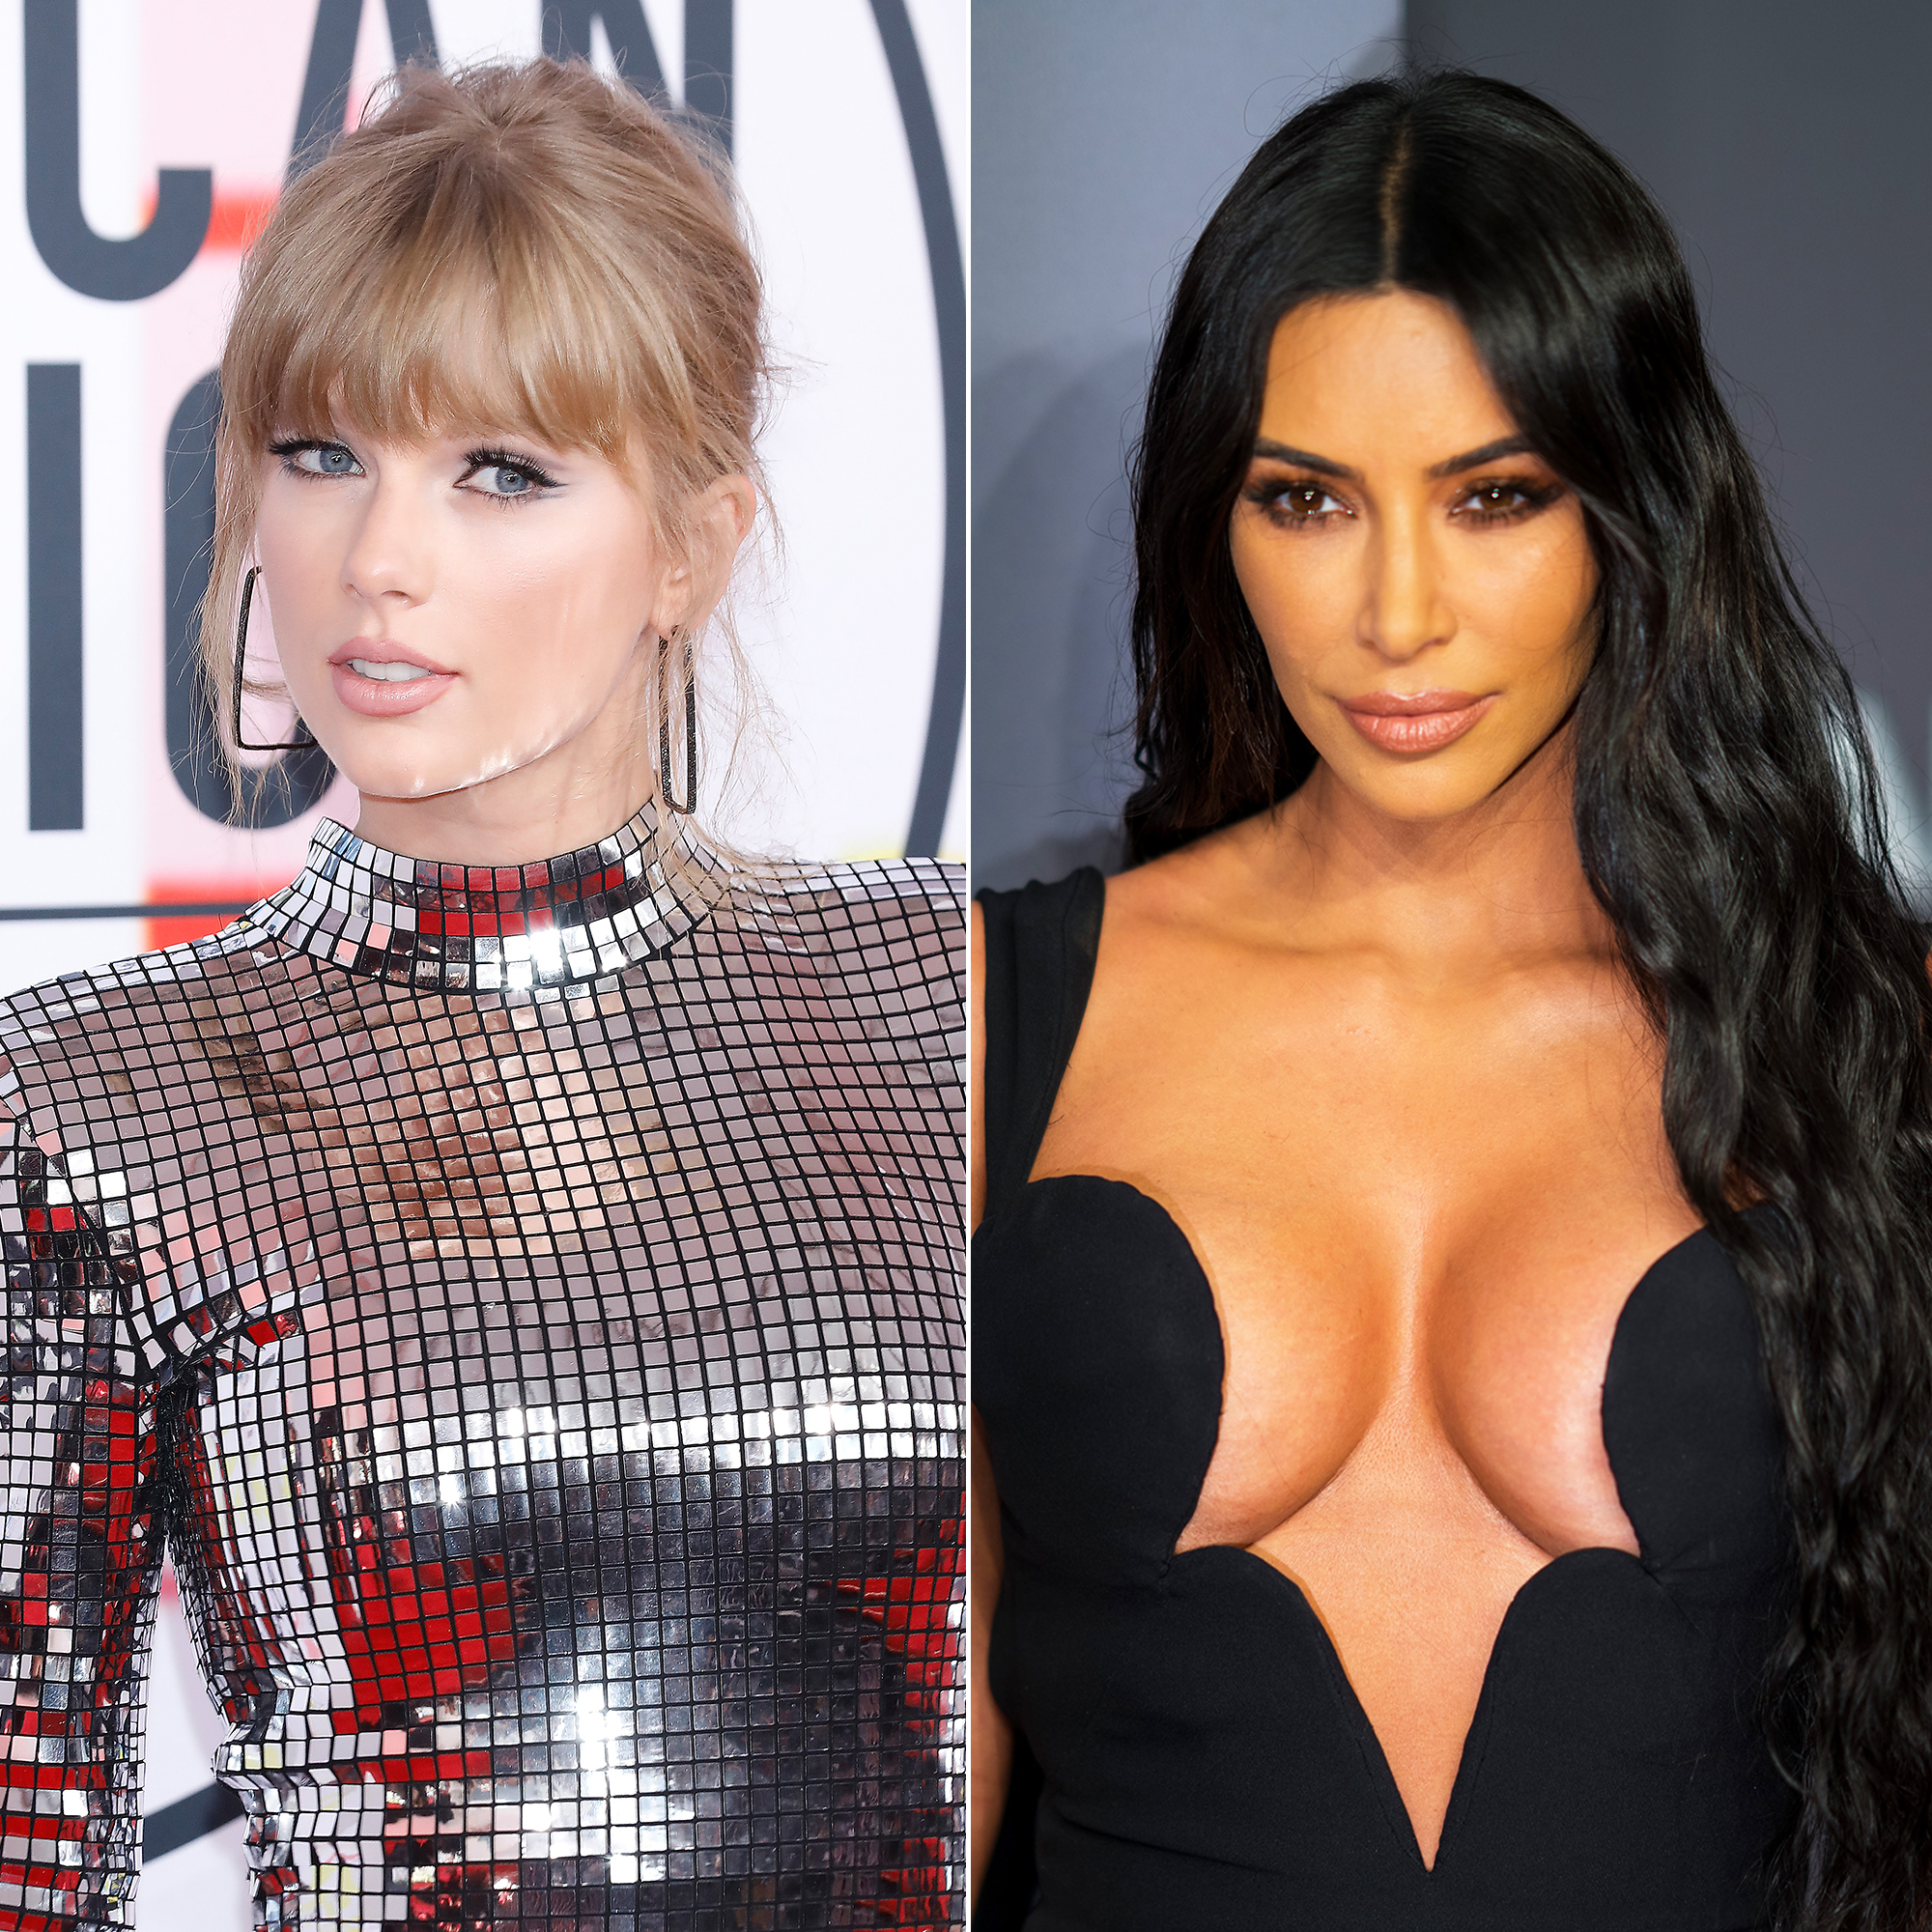 Taylor Swift's Feuds Then and Now: Katy Perry, Kanye West, More